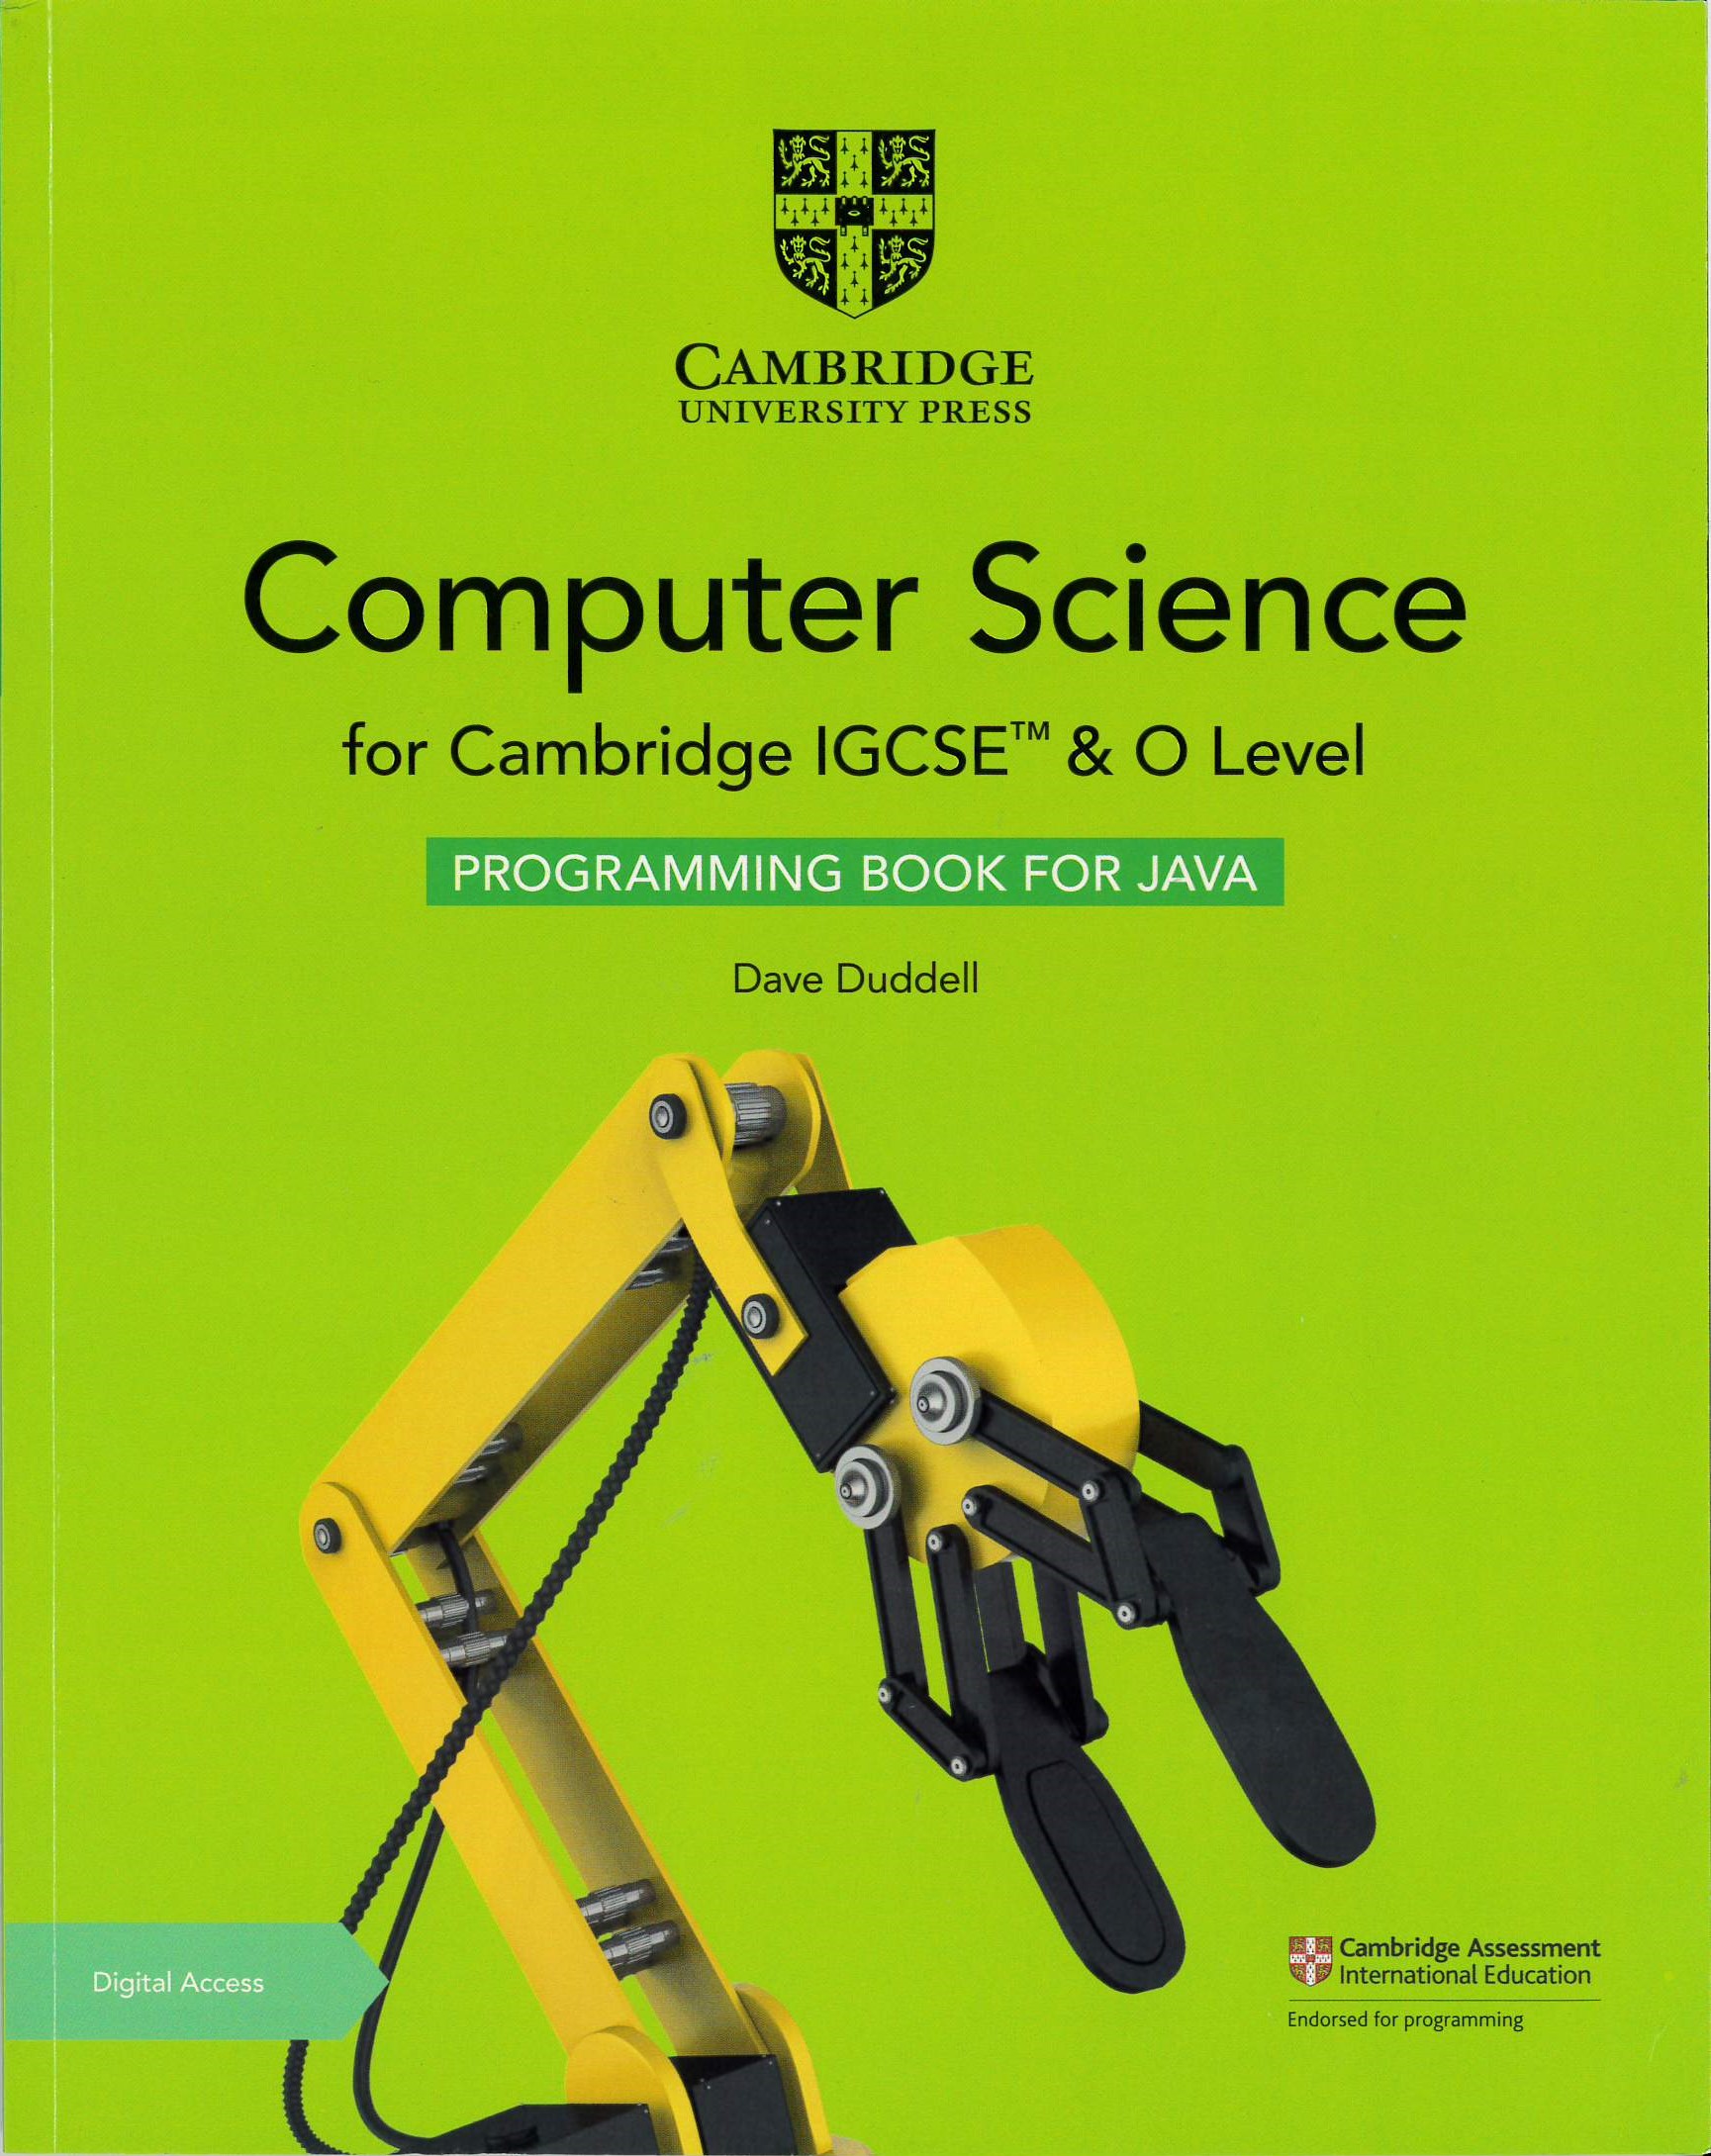 Computer science for Cambridge IGCSE and O level : programming book for Java